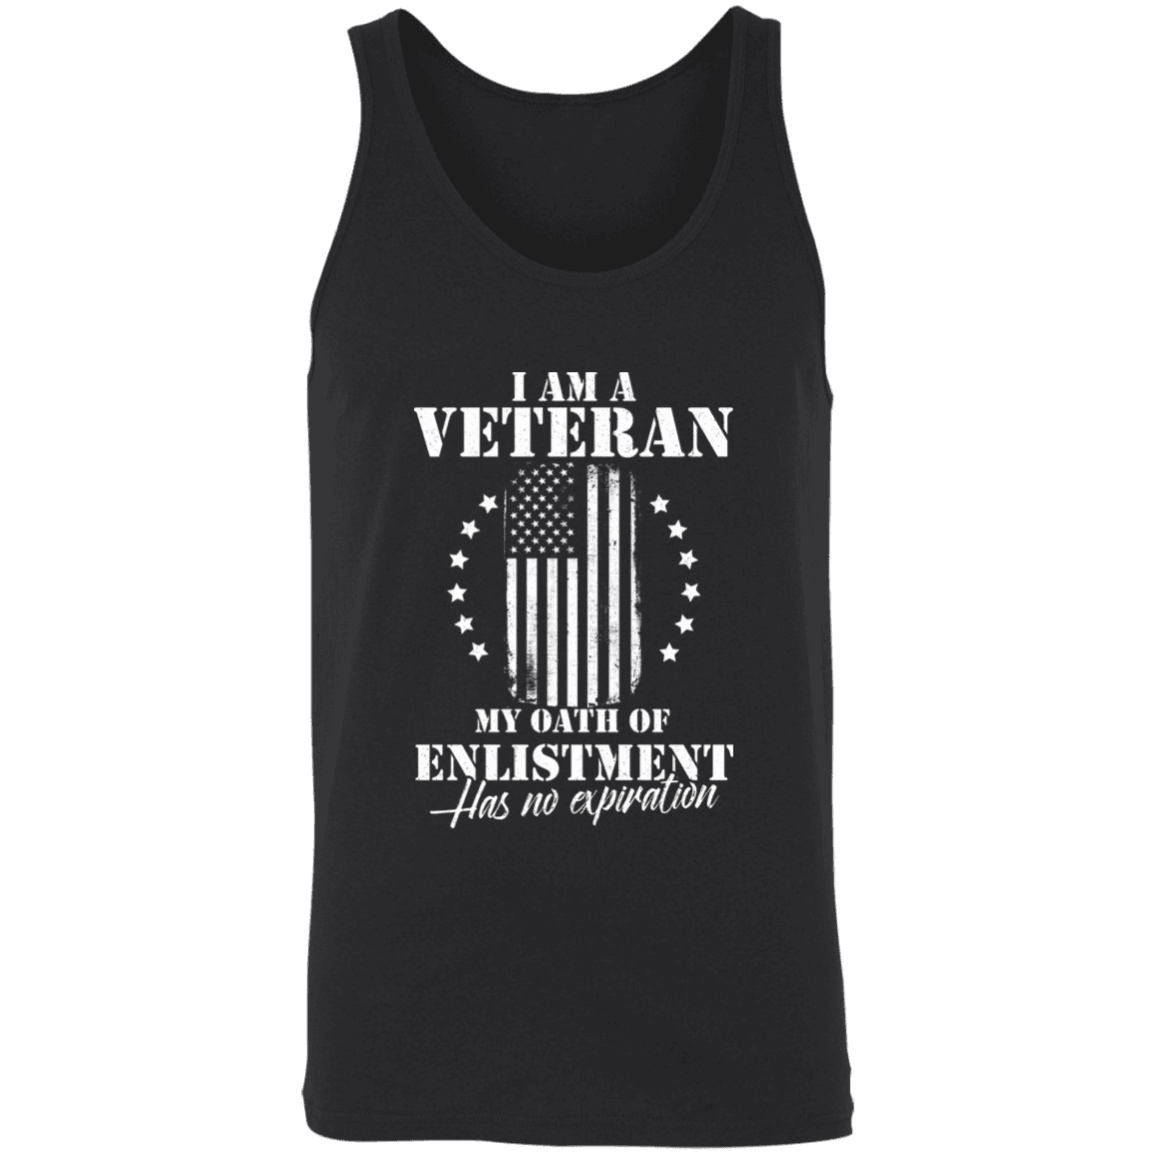 Designs by MyUtopia Shout Out:I Am A Veteran My Oath of Enlistment does not Expire Unisex Tank,X-Small / Black,Tank Tops